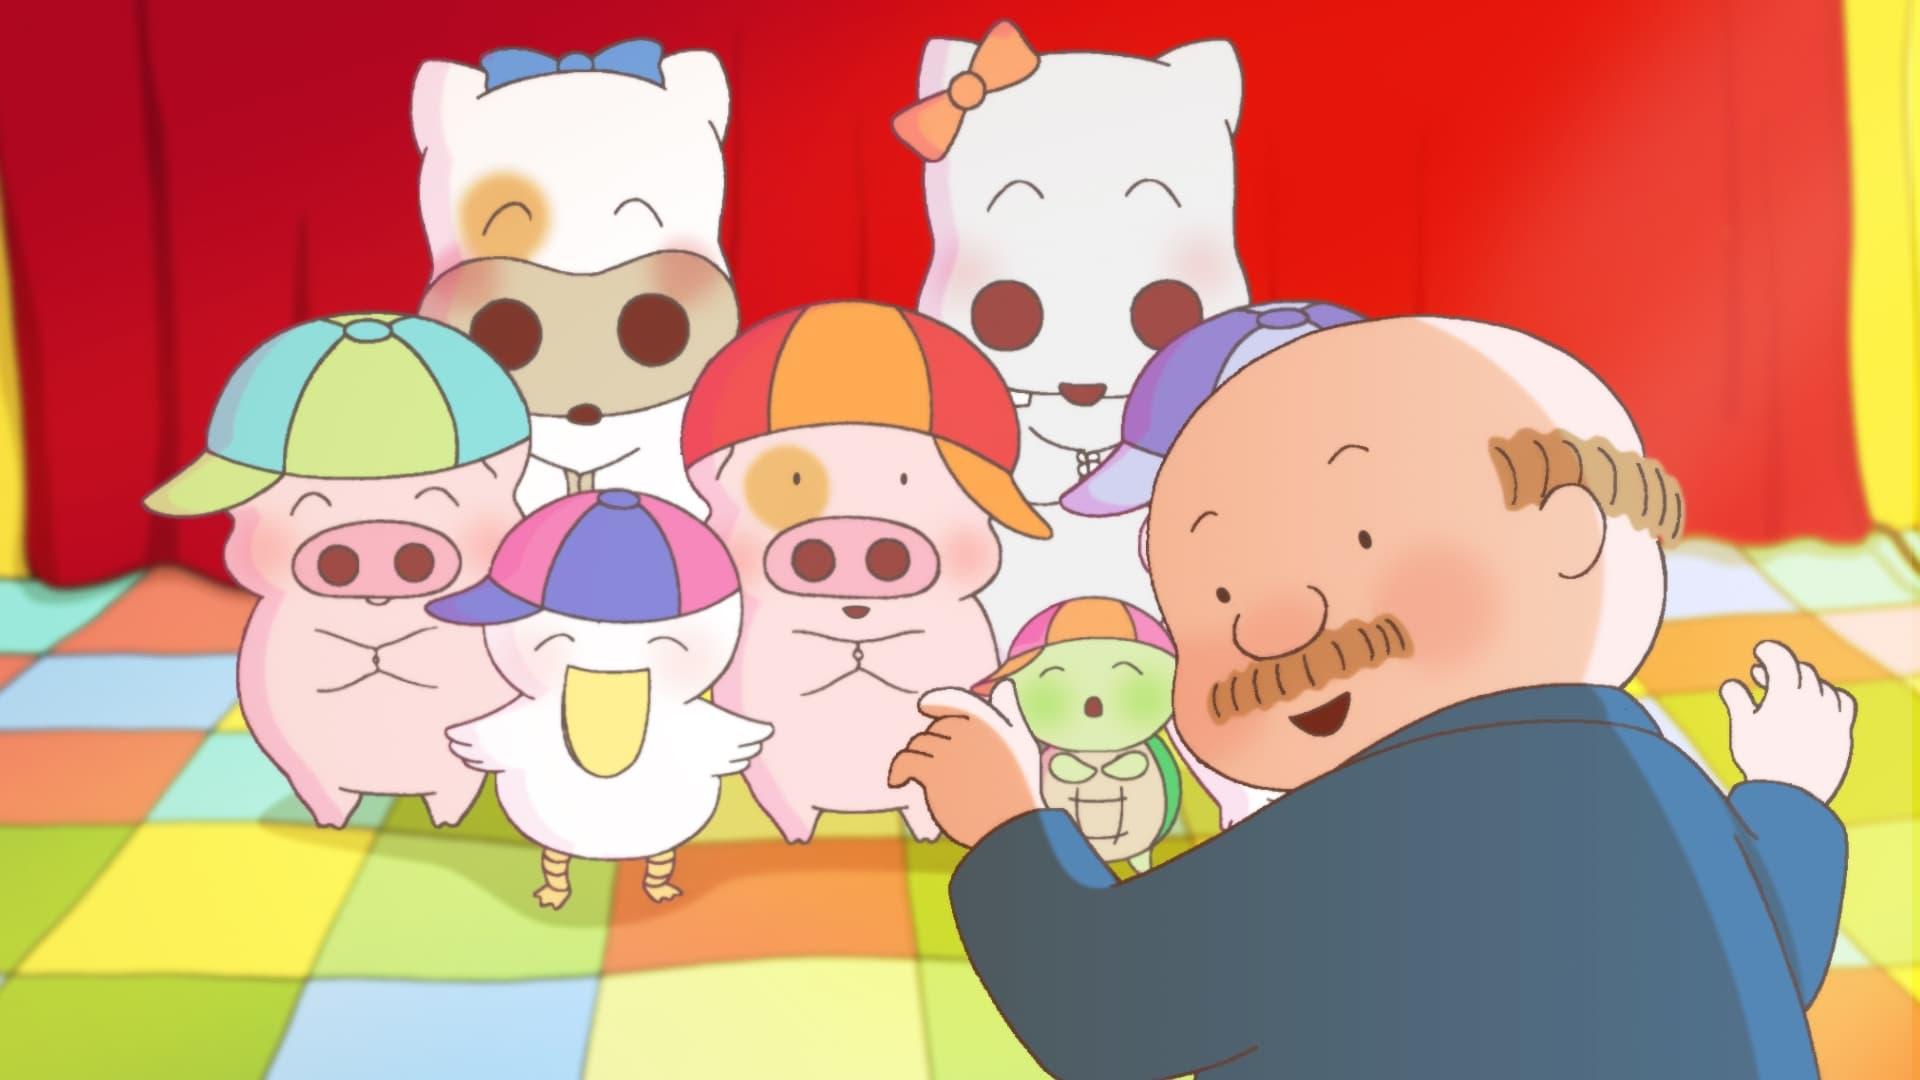 McDull: The Pork of Music backdrop